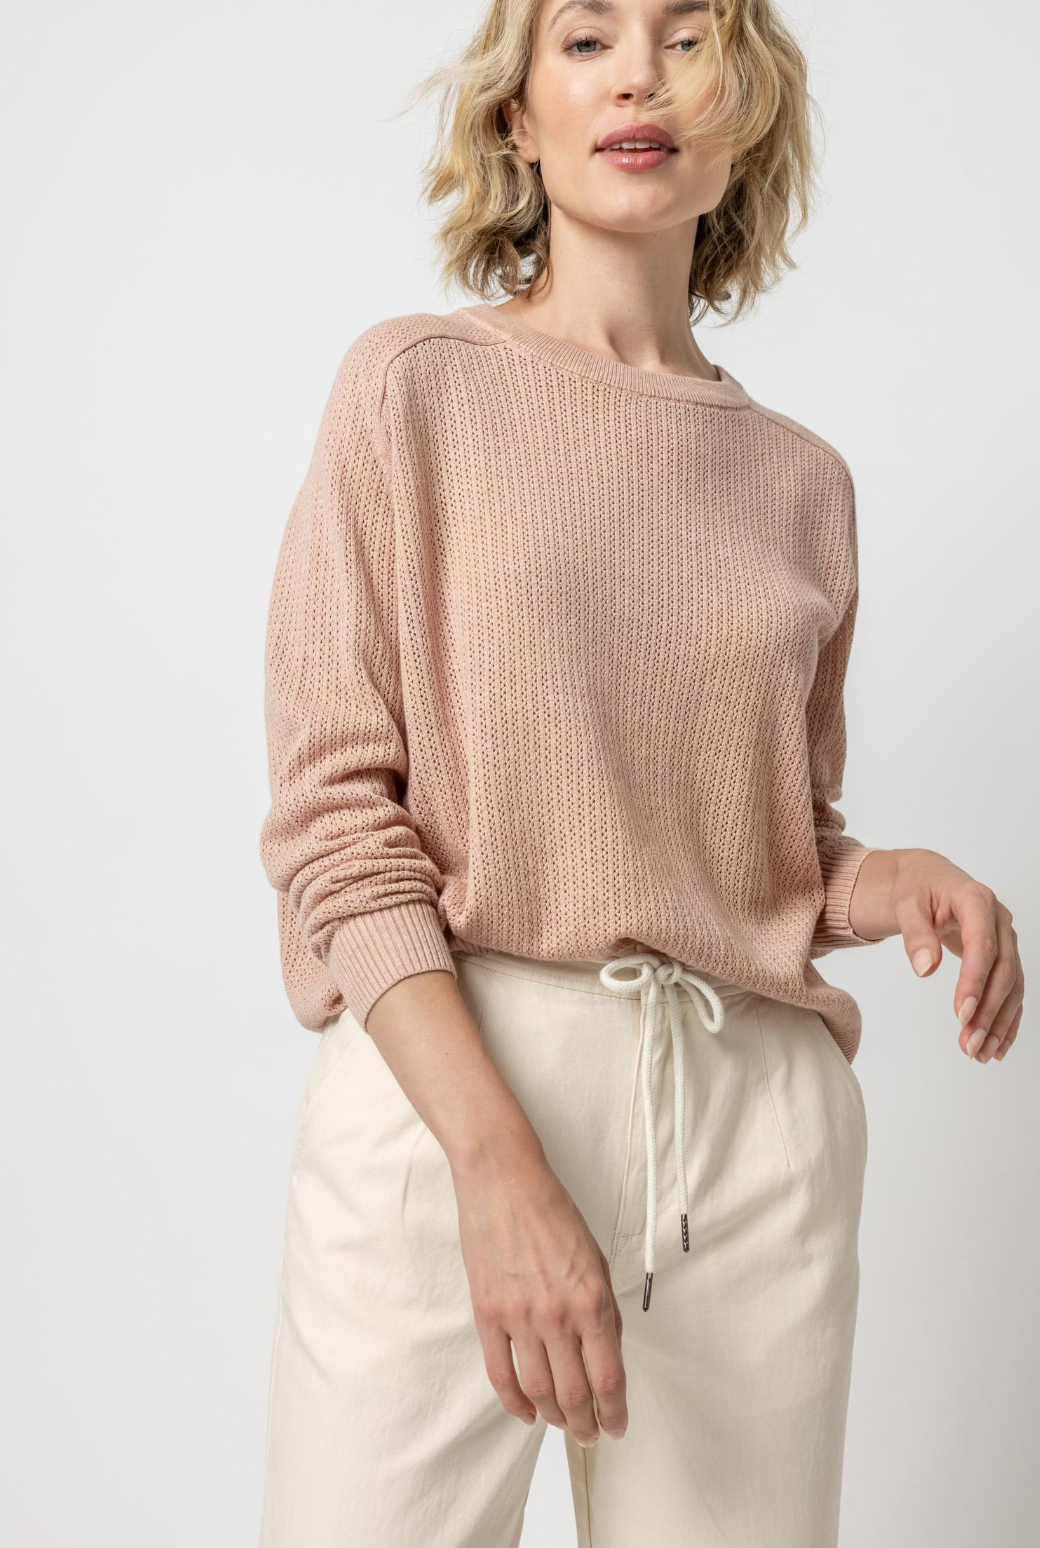 Saddle Sleeve Pullover Sweater